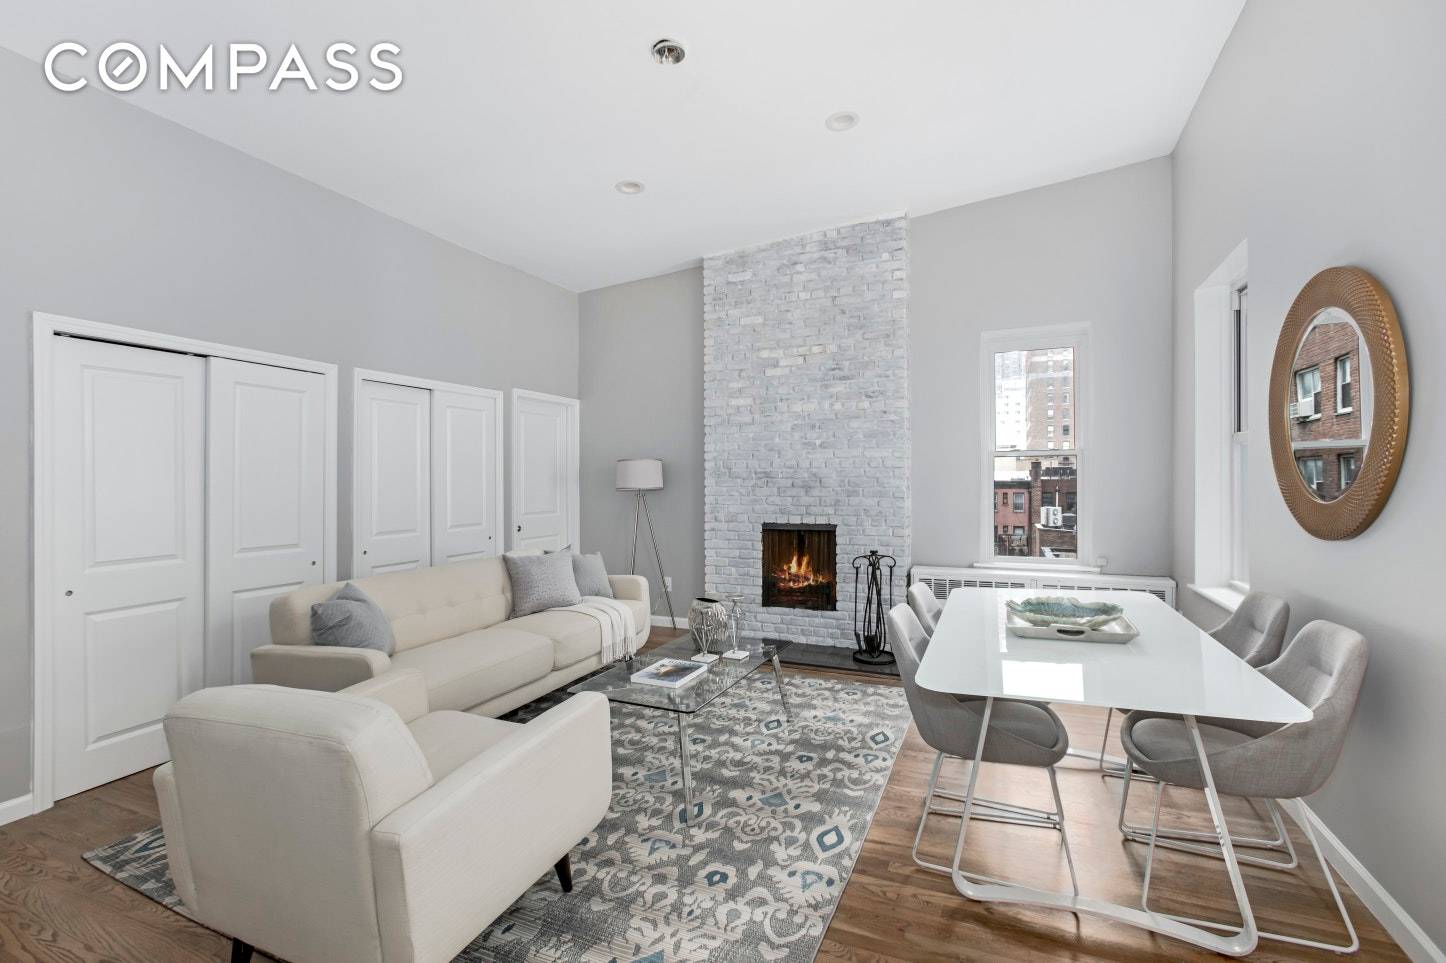 Enjoy incredible comfort and ease in this meticulously renovated two bedroom, one bathroom home in a boutique Murray Hill cooperative.